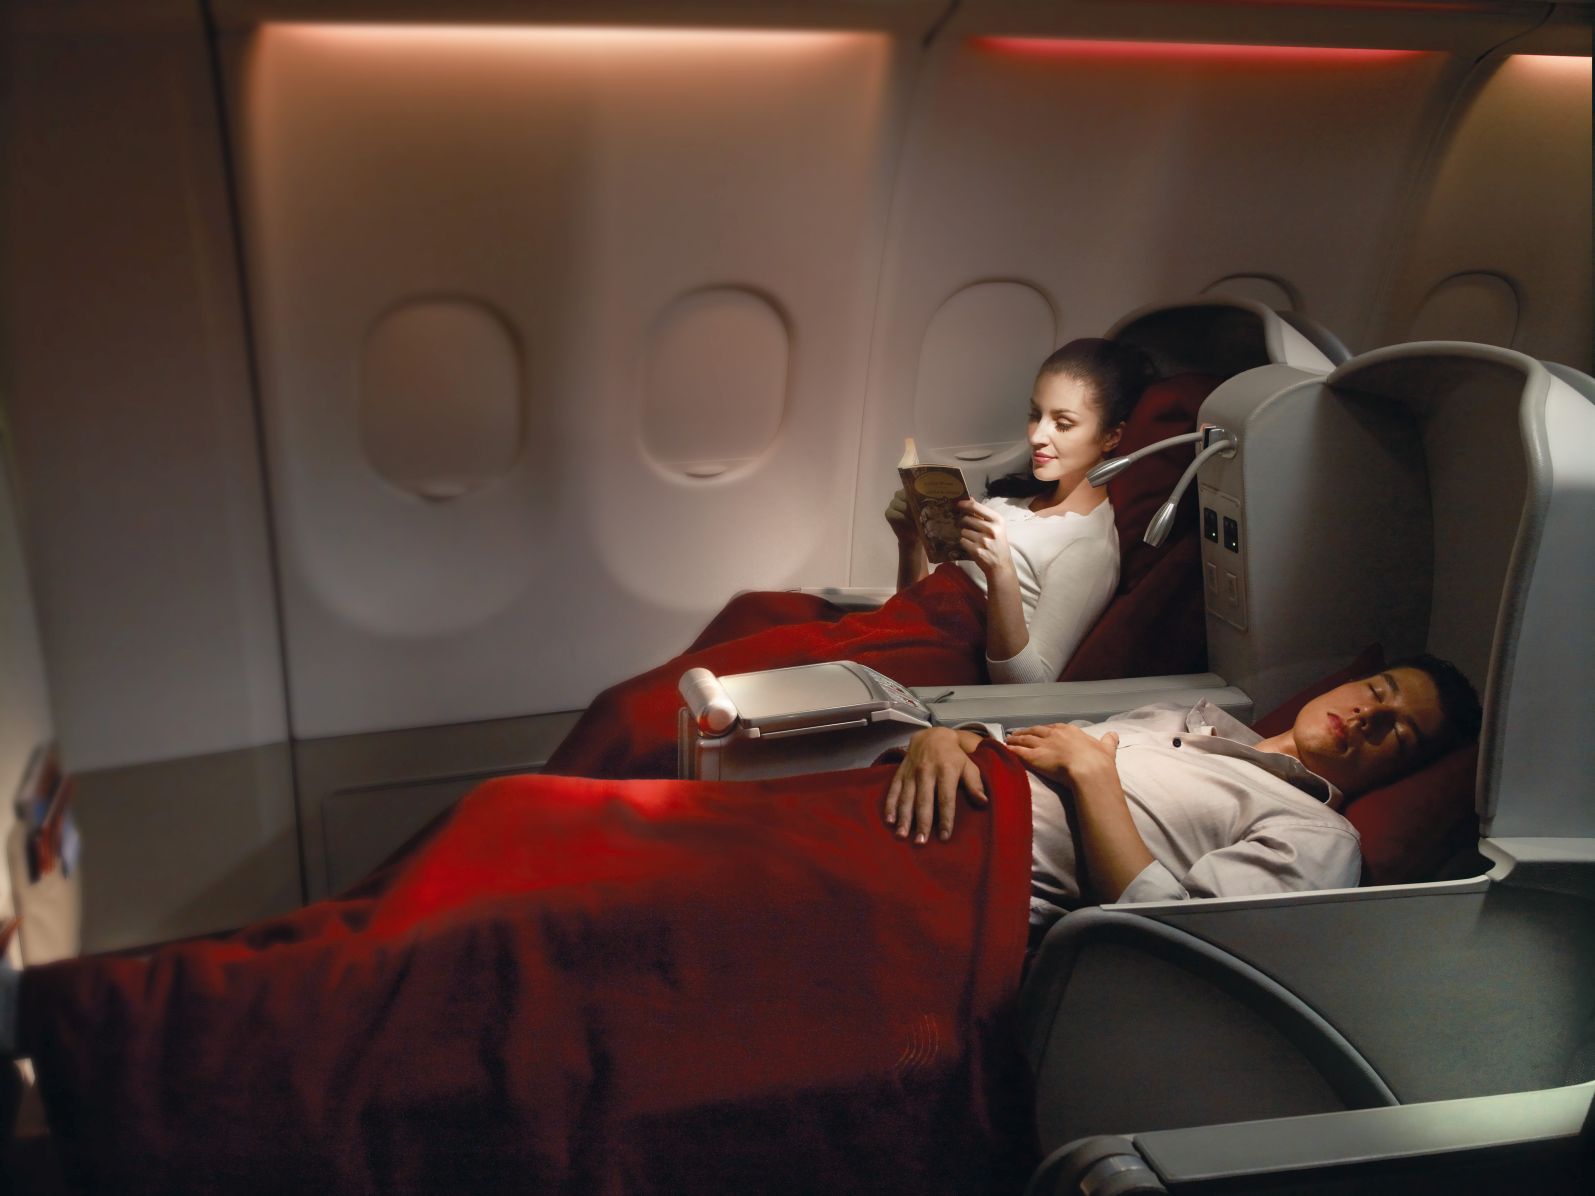 Despite announcing a luxurious new first-class product, Garuda Indonesia maintains the highest standards in its Executive Class cabin, finds Nick Walton on a recent flight from Jakarta.